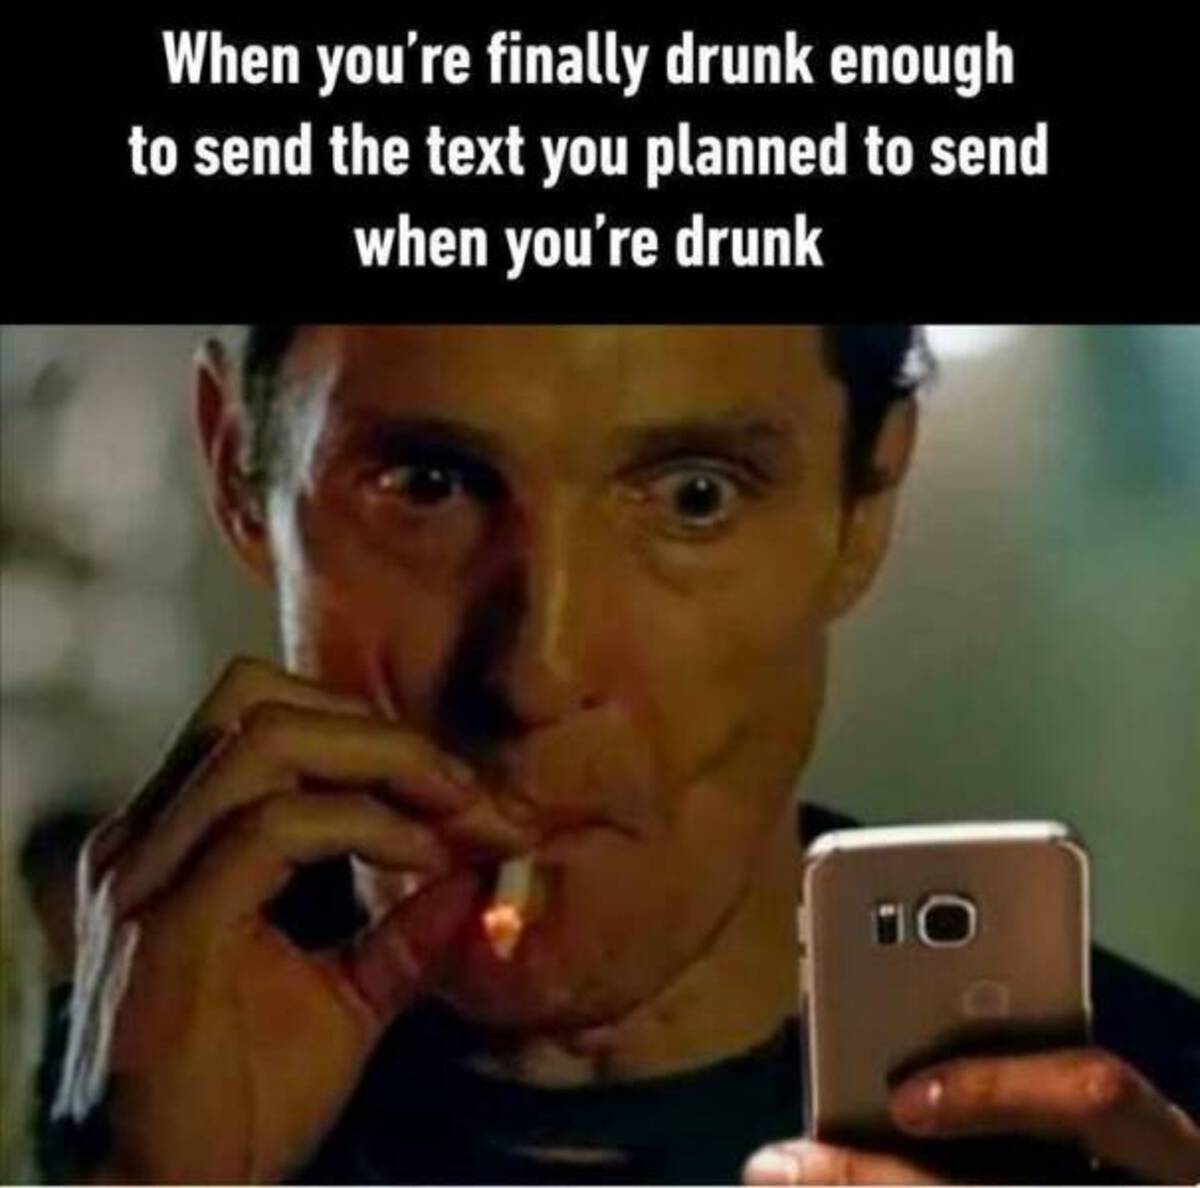 drunk texting meme - When you're finally drunk enough to send the text you planned to send when you're drunk 10